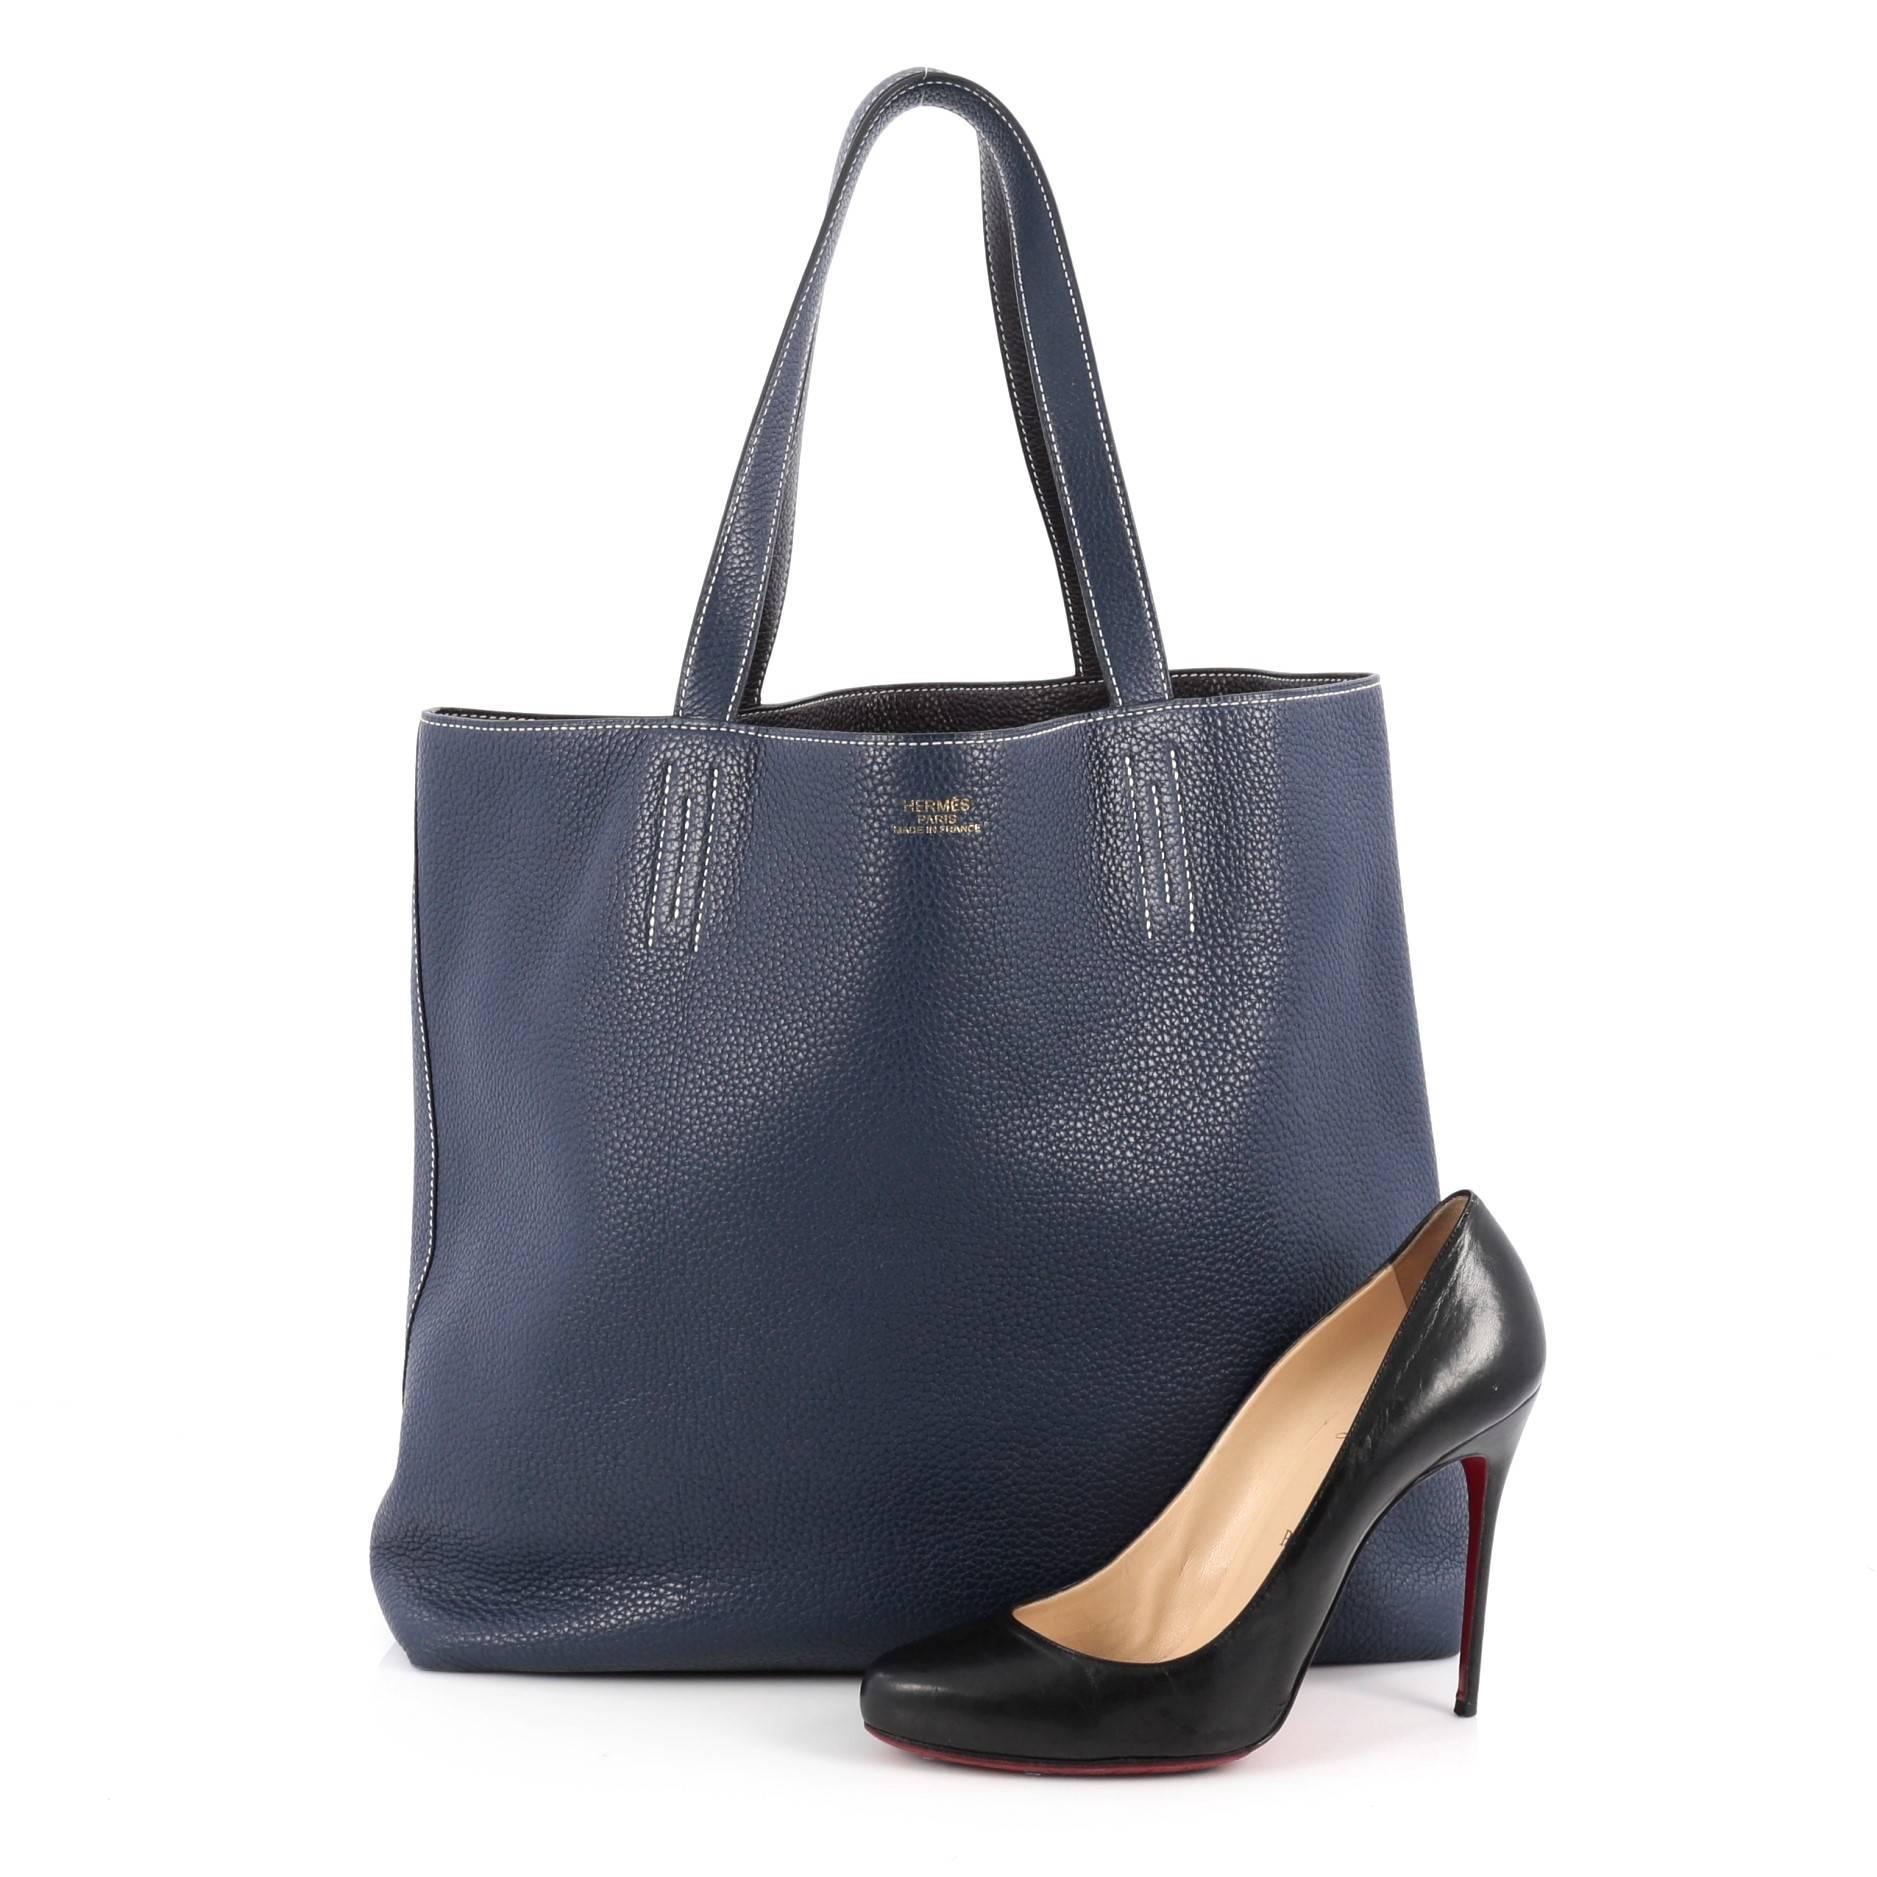 This authentic Hermes Double Sens Tote Clemence 45 combines a simple and functional style from Hermes perfect for everyday use. Crafted from soft luxurious reversible veau taurillon clemence leather in blue sapphire and raisin purple, this versatile